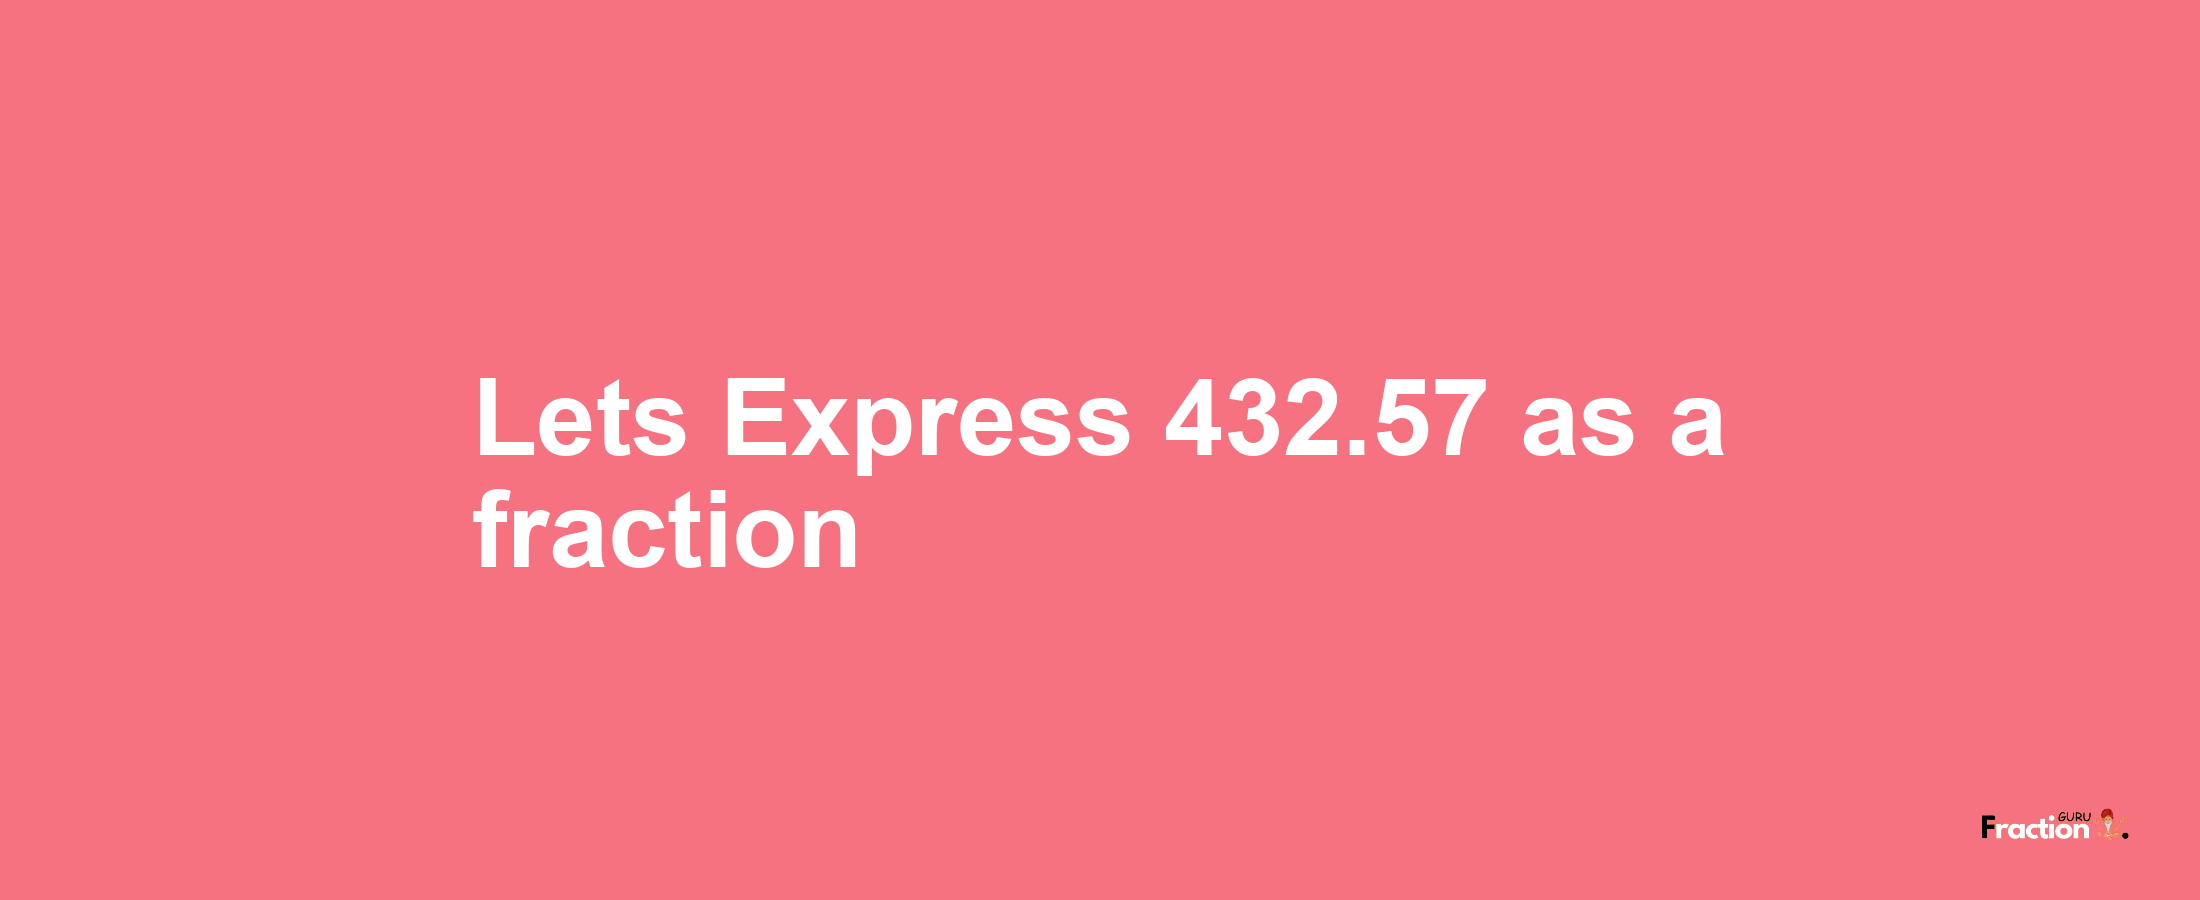 Lets Express 432.57 as afraction